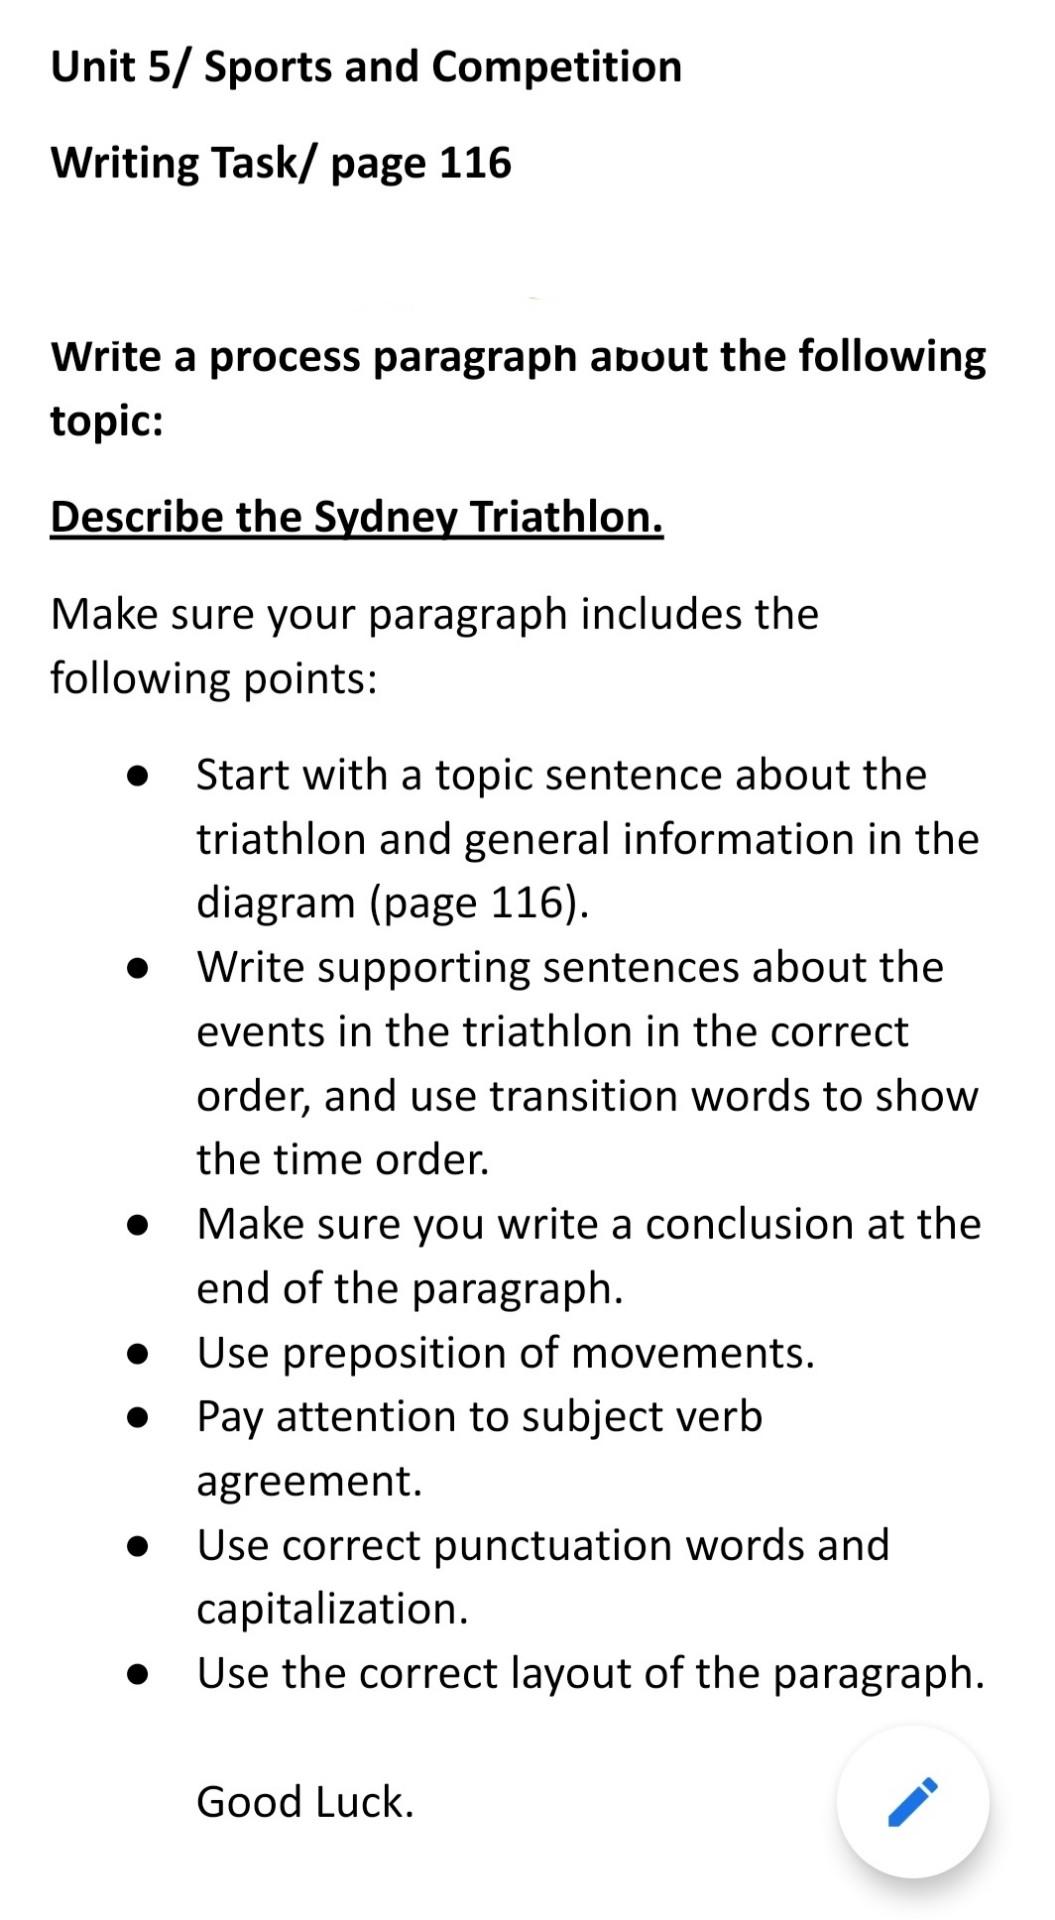 Unit 5/ Sports and Competition Writing Task/ page 116 | Chegg.com